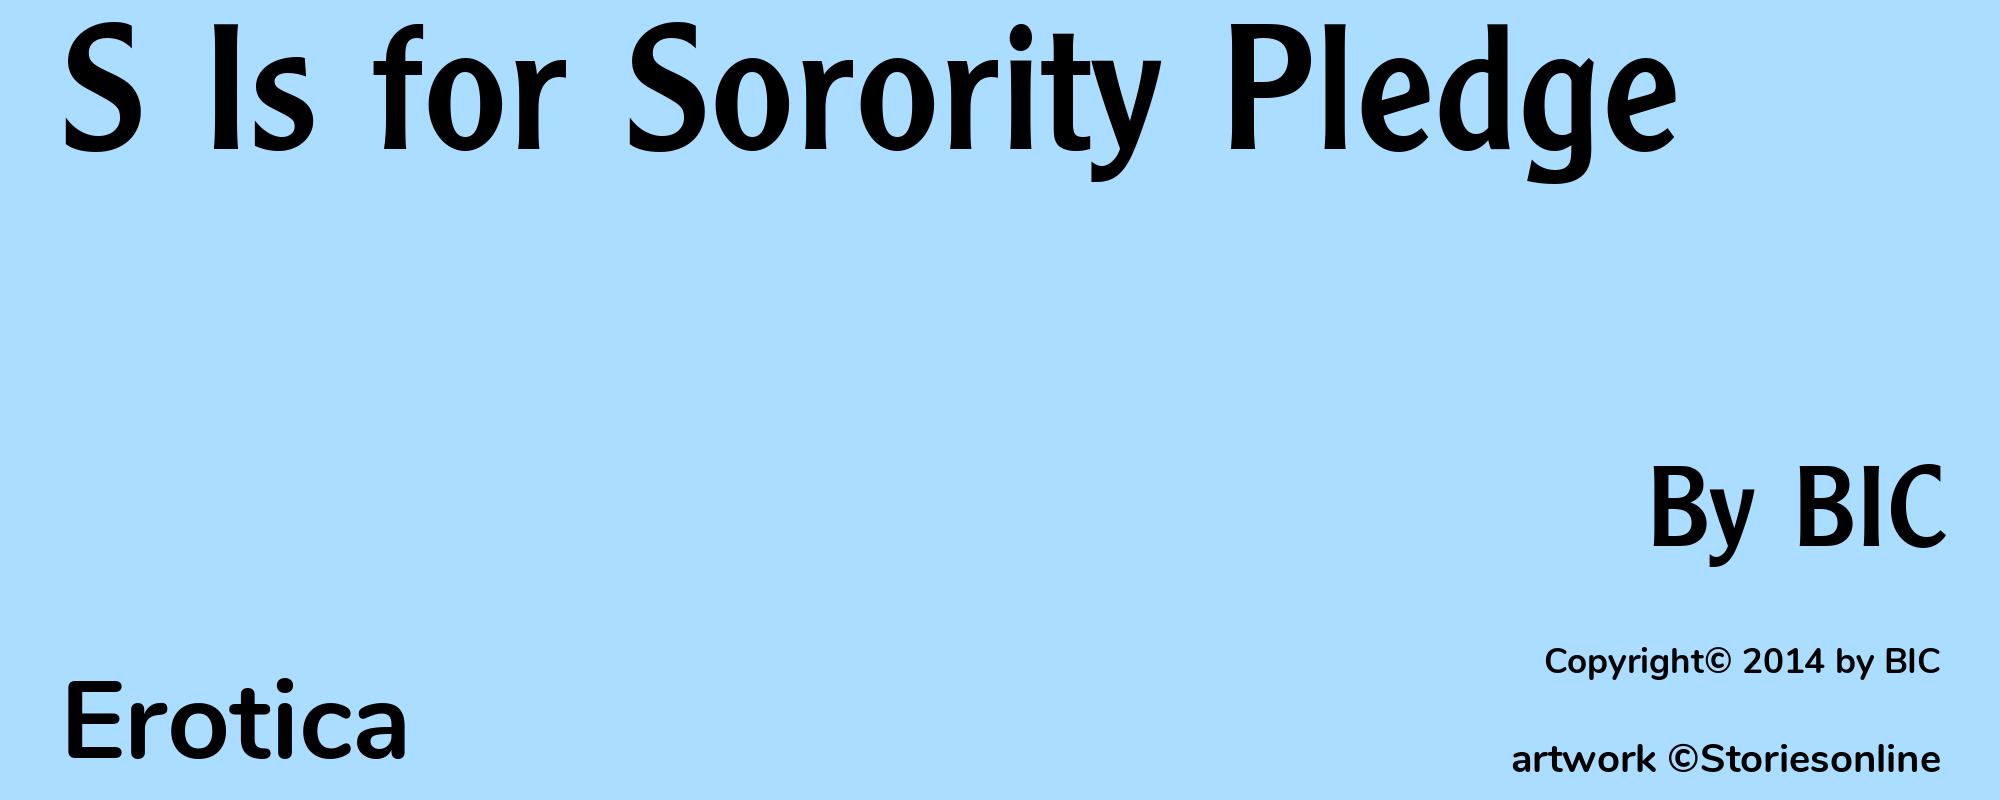 S Is for Sorority Pledge - Cover